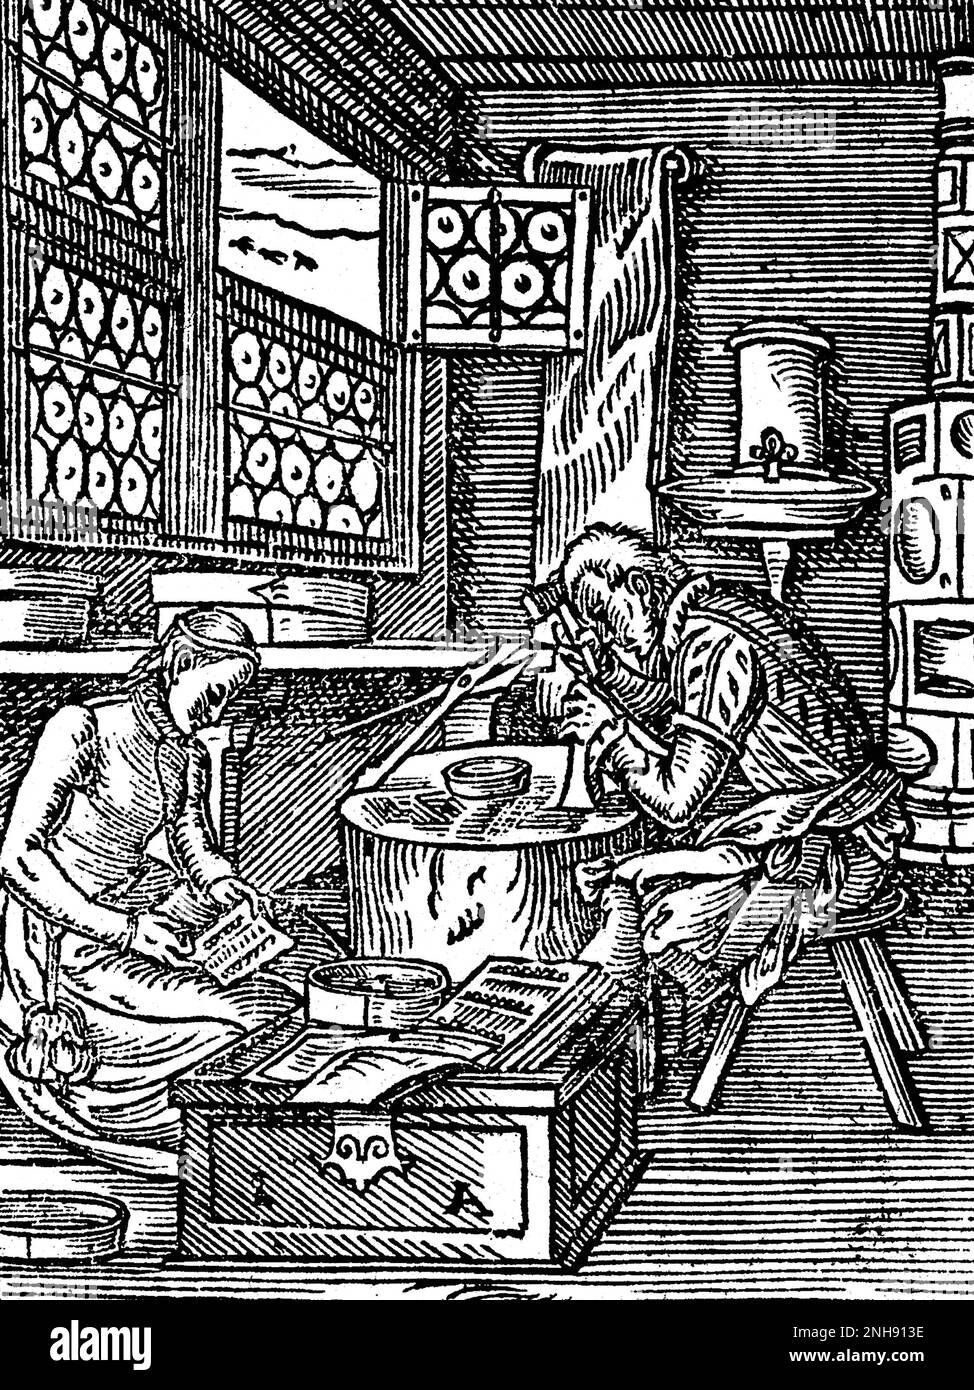 A man and a woman making pins and needles. Woodcut from Jost Amman's Book of Trades, 1568. Stock Photo